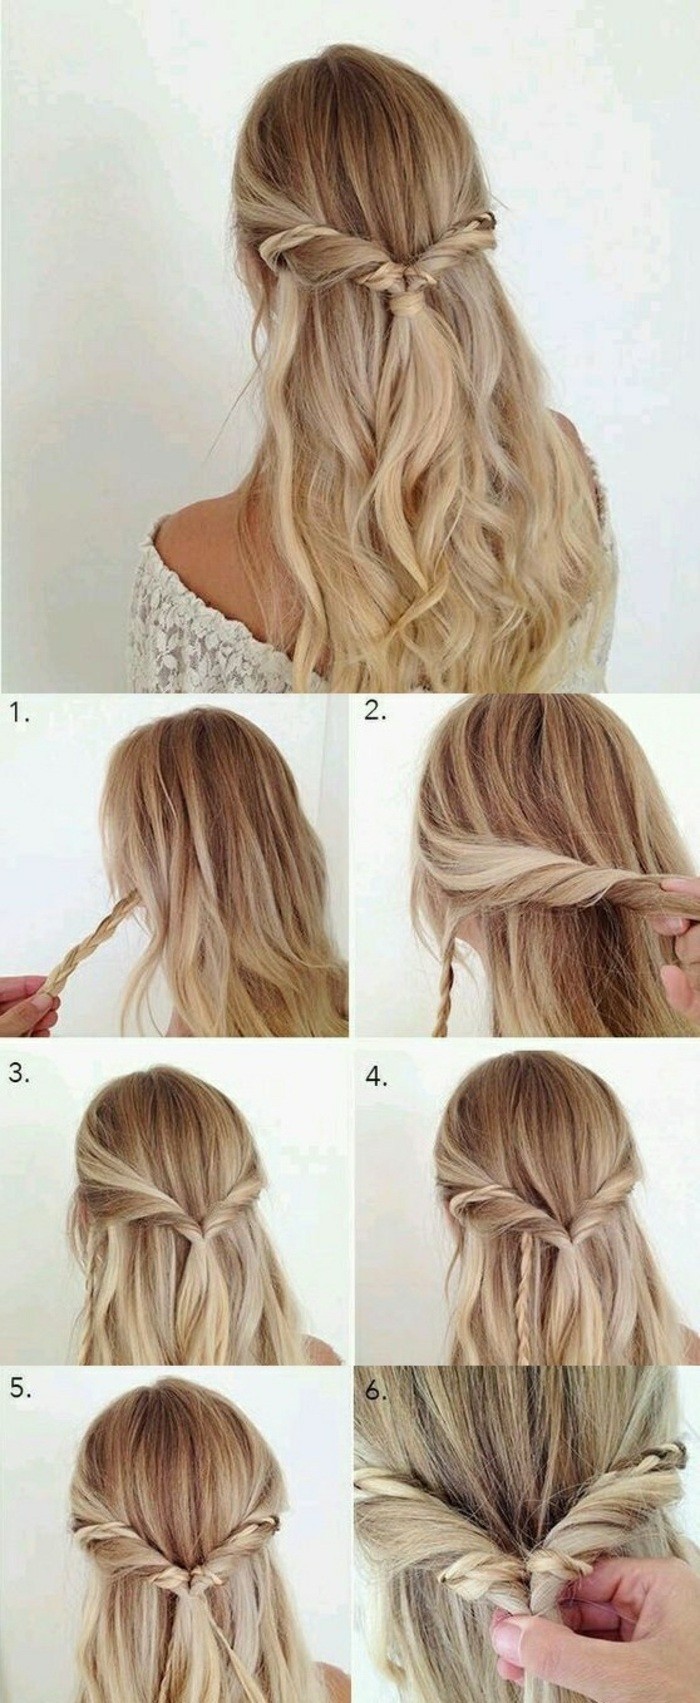 step by step diy tutorial, twisted hair, long blonde wavy hair, with braids, prom hairstyles for short hair